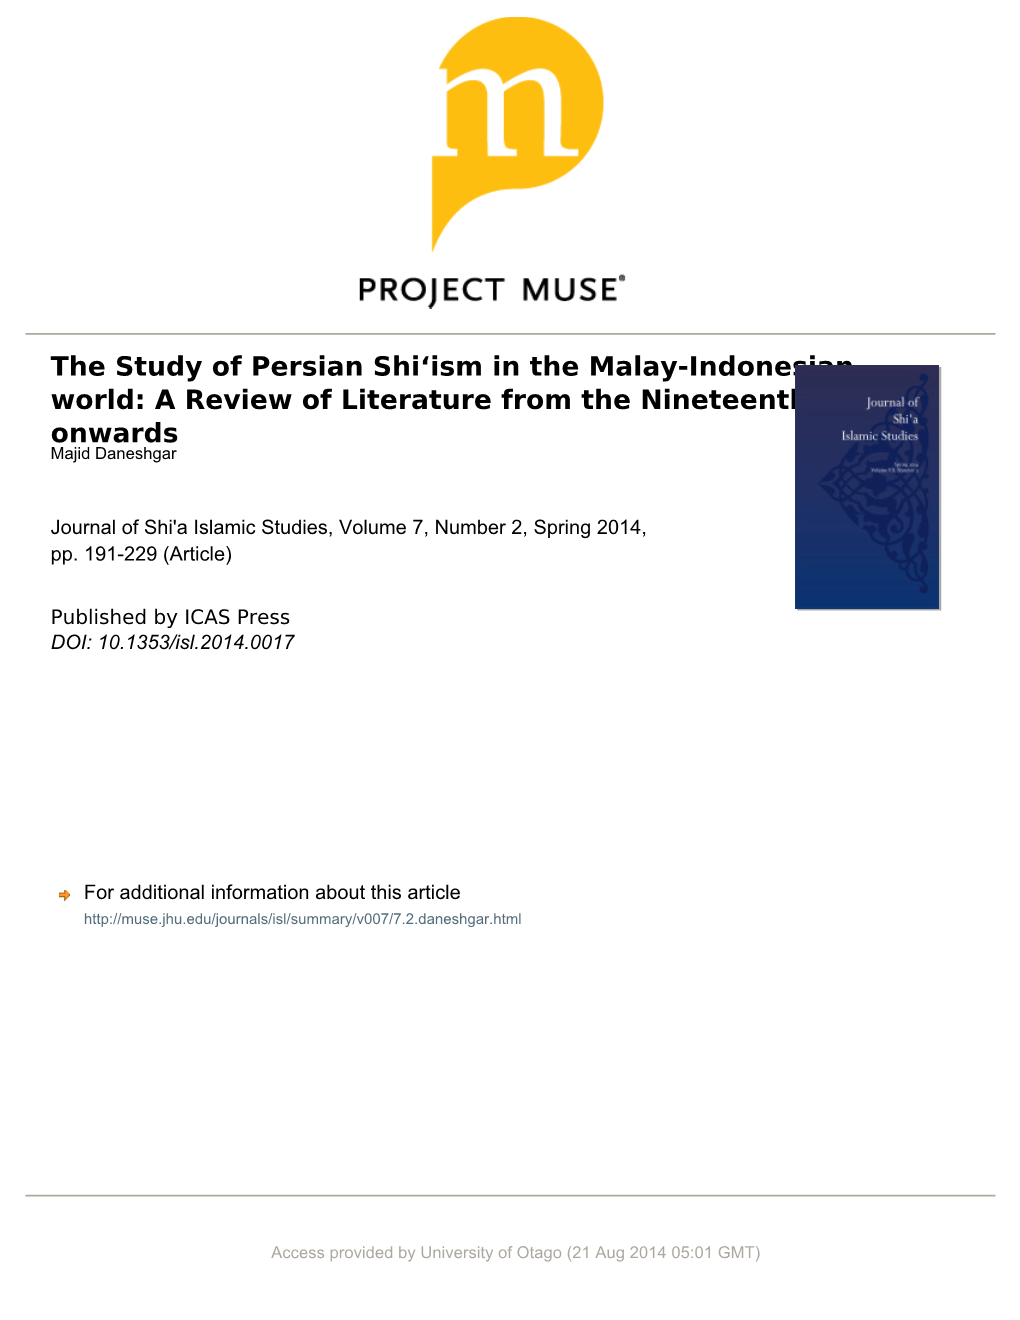 The Study of Persian Shiʻism in the Malay